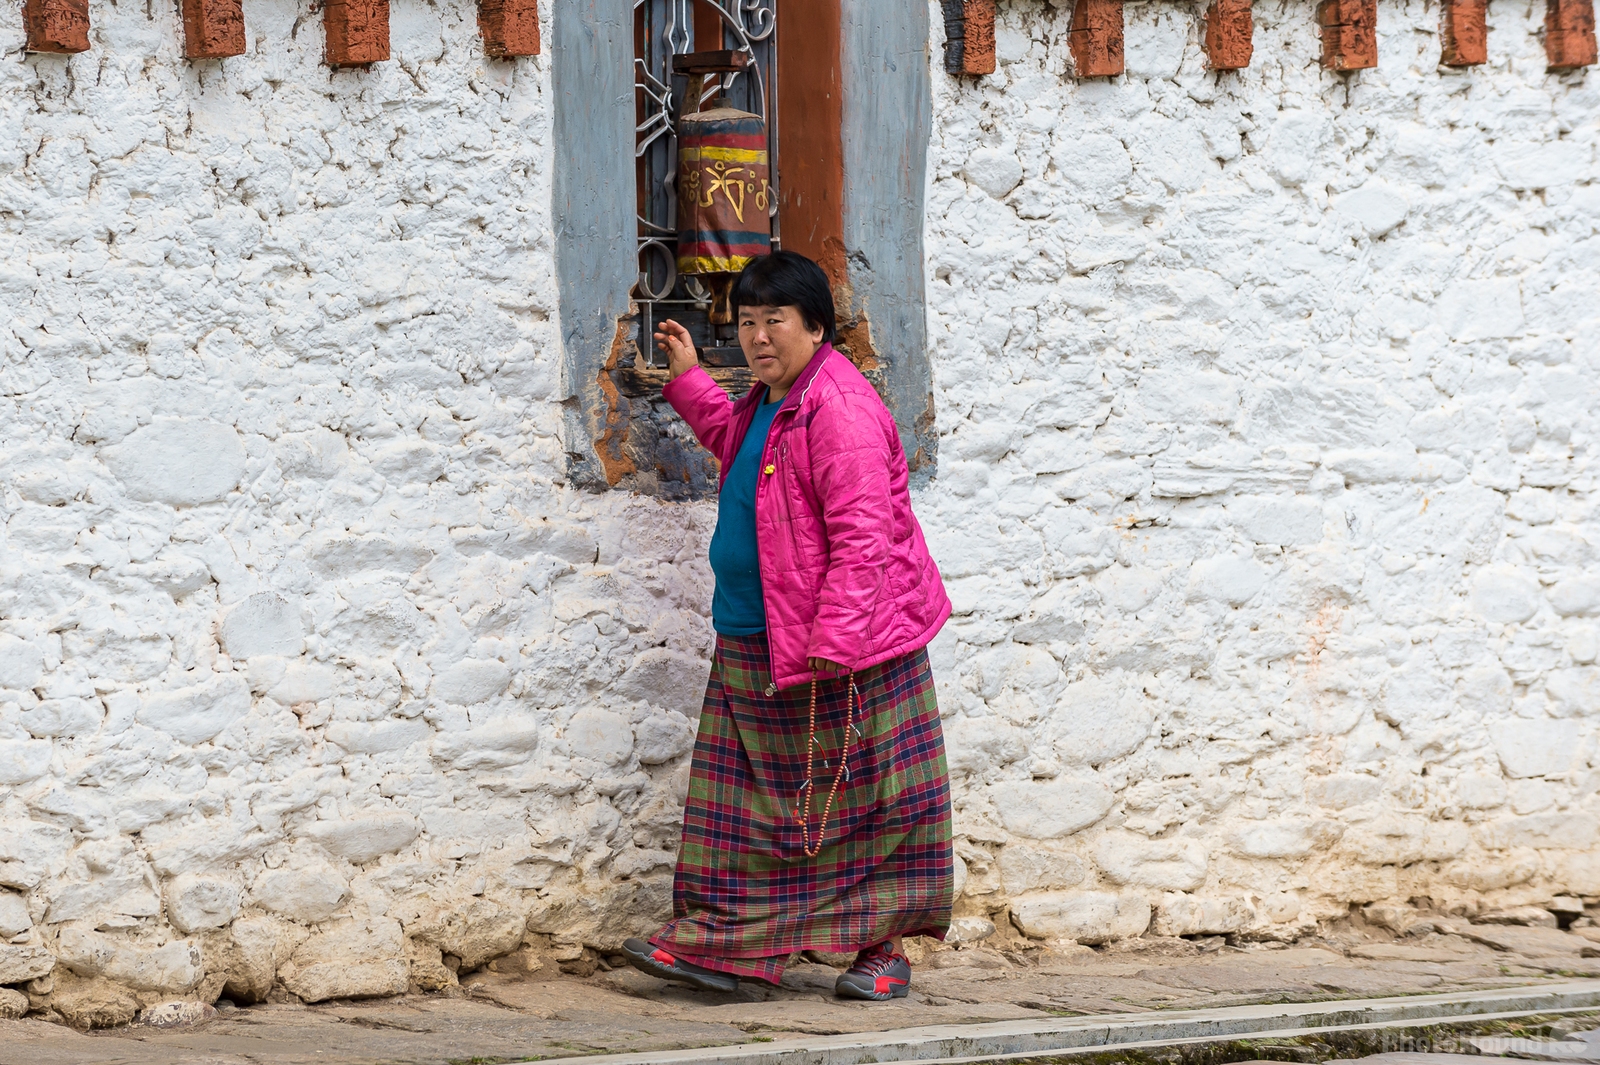 Image of Jambay Lhakhang by Sue Wolfe